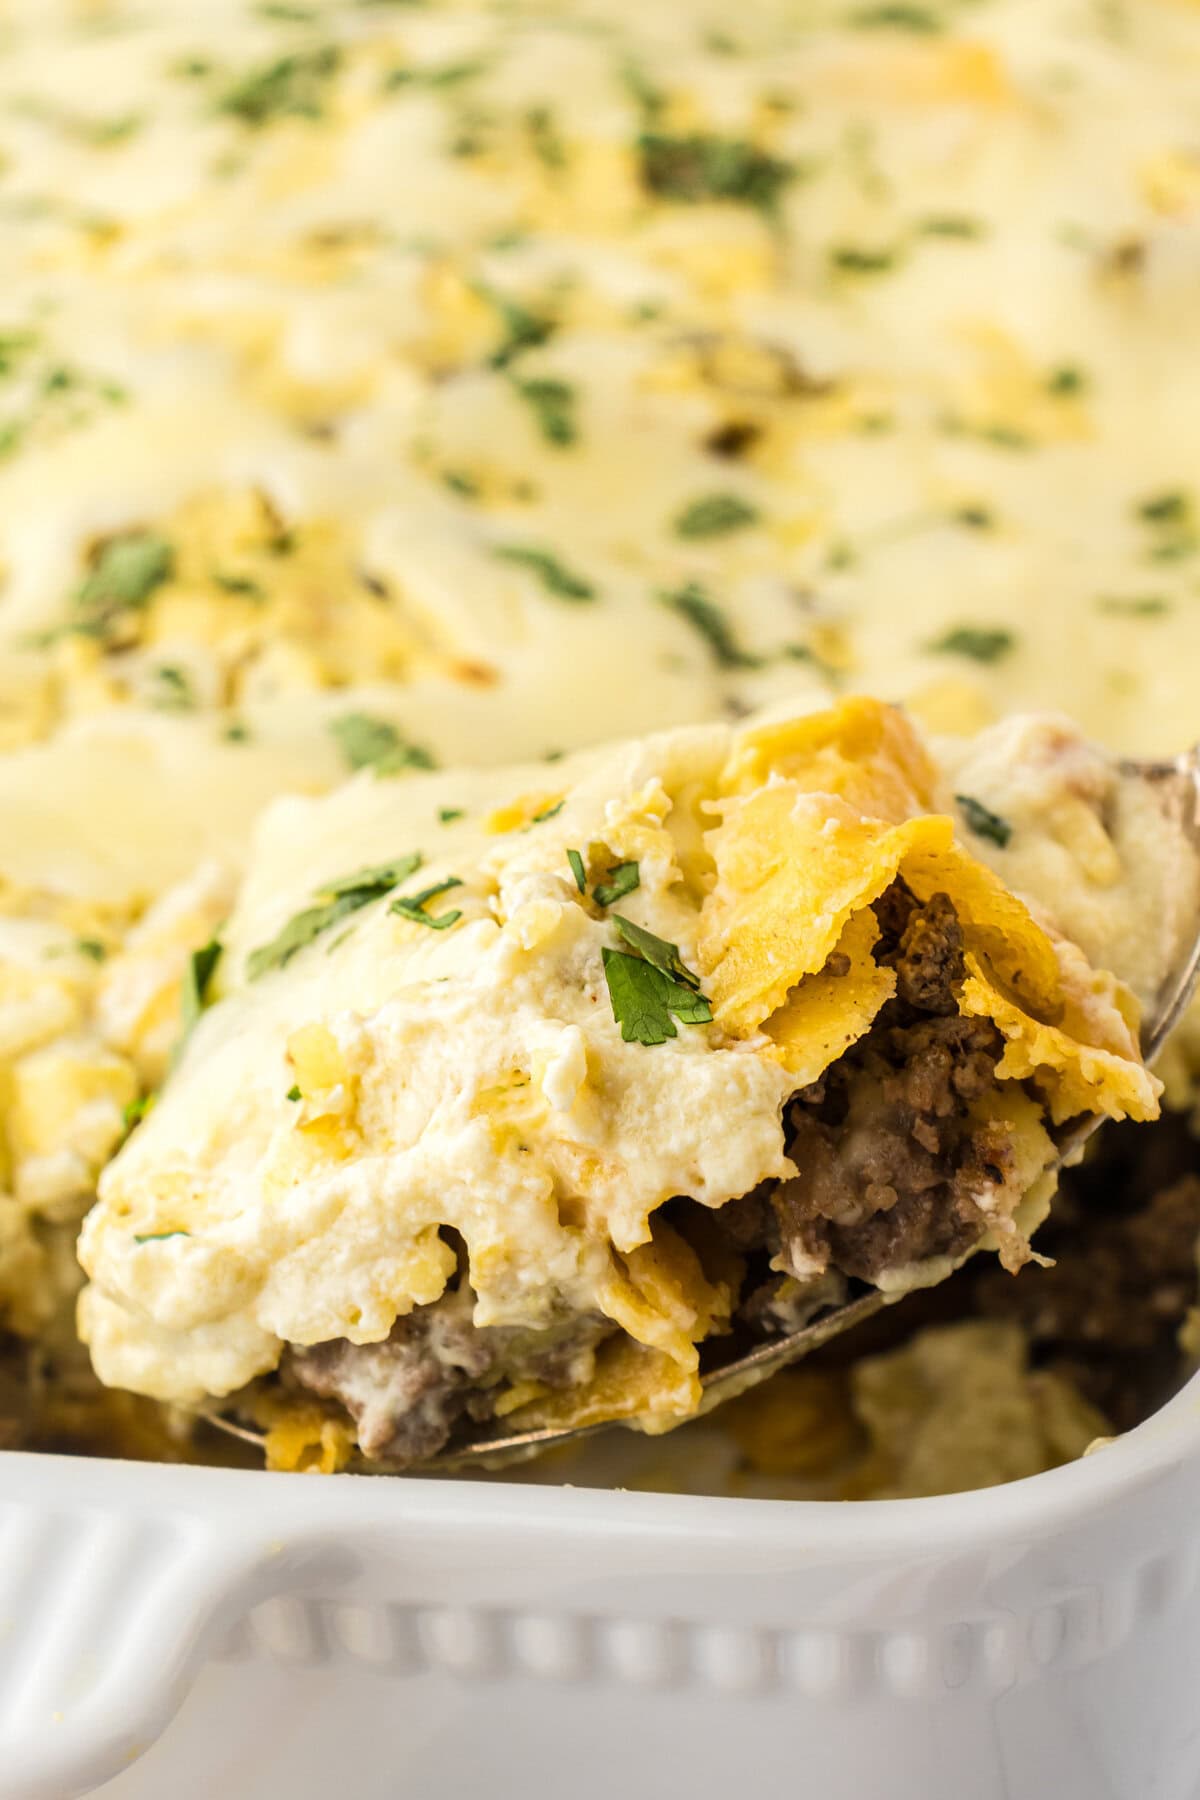 An up-close photo of a scoop of green chile enchiladas with beef and cilantro.